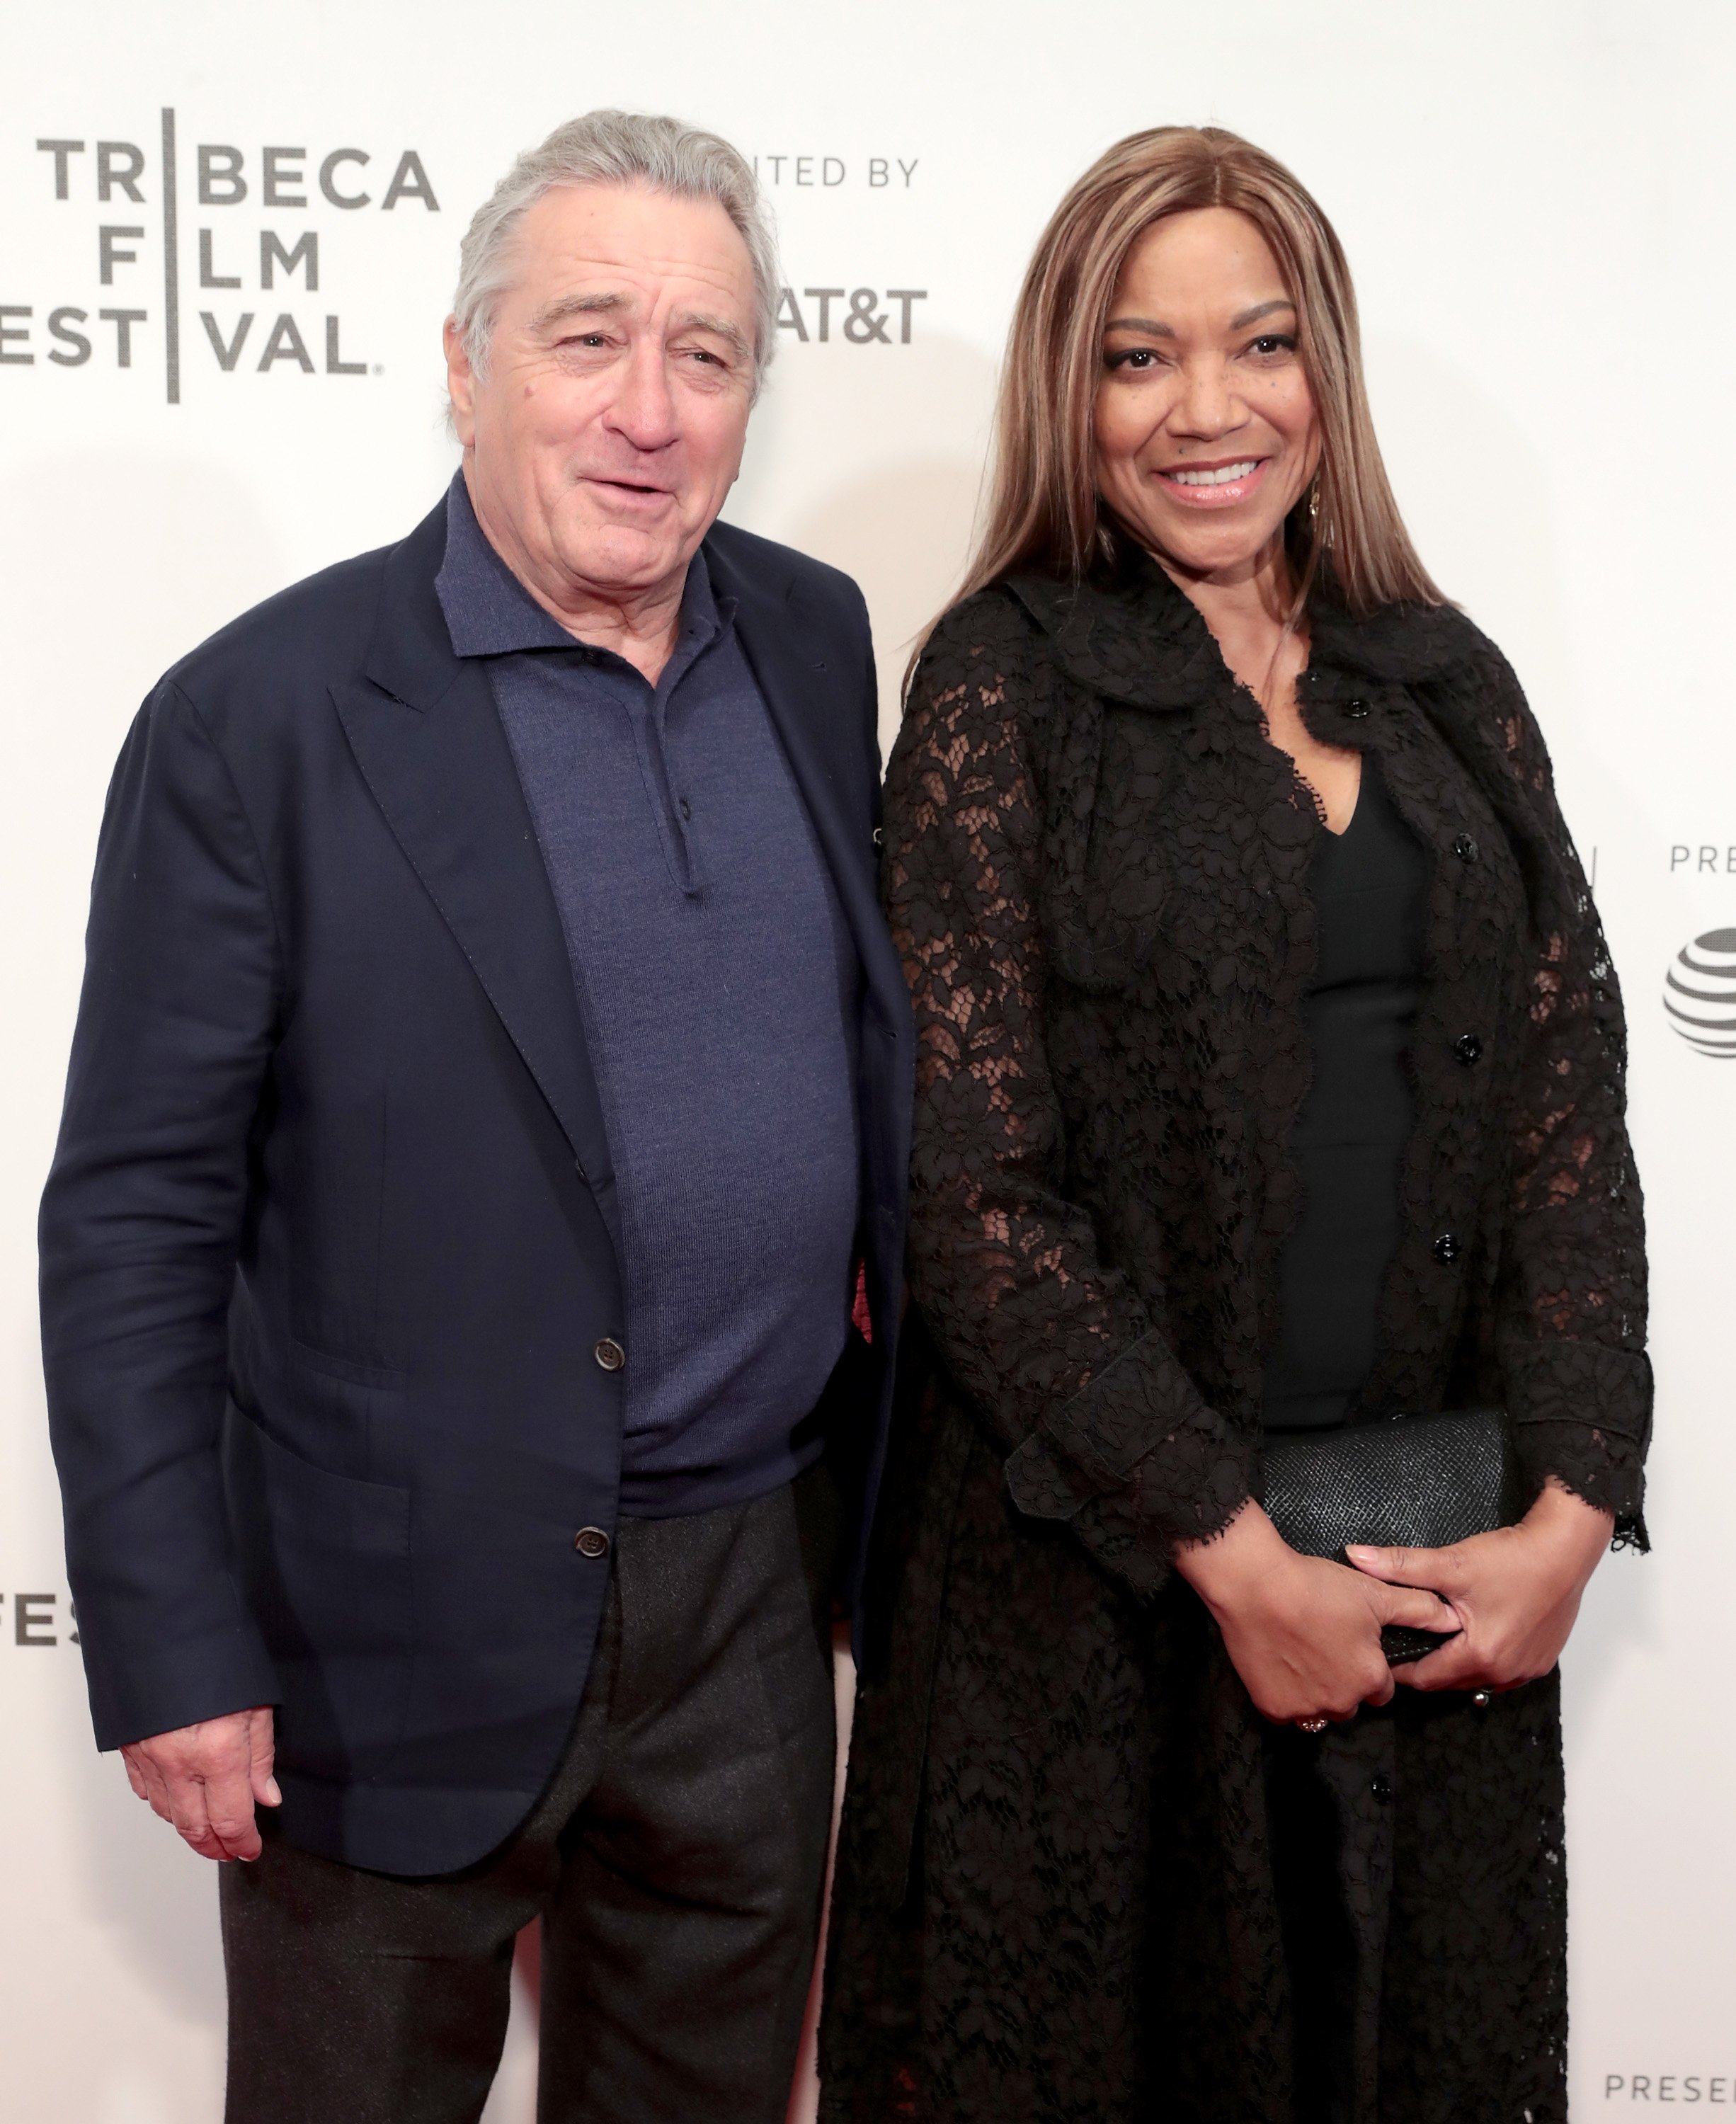 Robert De Niro and Grace Hightower at the screening of "The Fourth Estate" at BMCC Tribeca PAC on April 28, 2018 in New York City | Photo: Getty Images